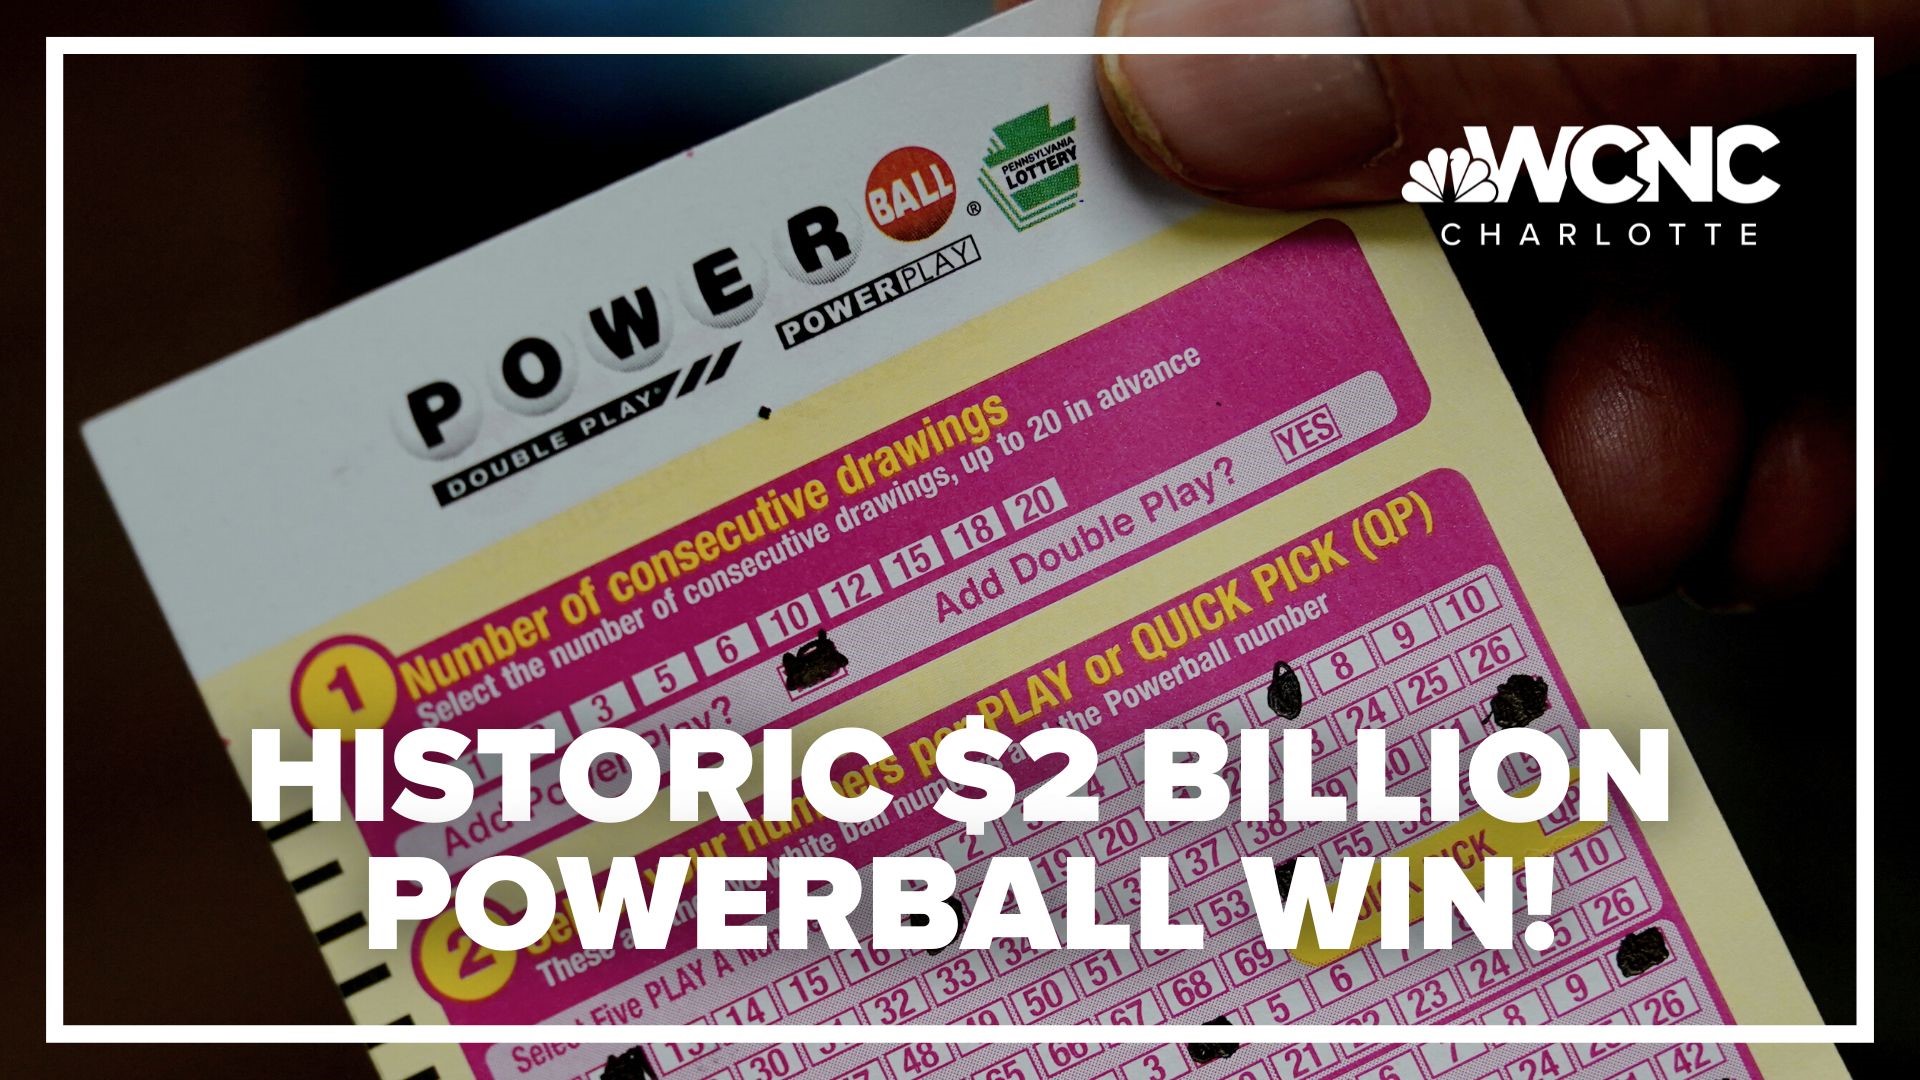 After months of waiting, someone finally hit the record $2 billion Powerball jackpot.